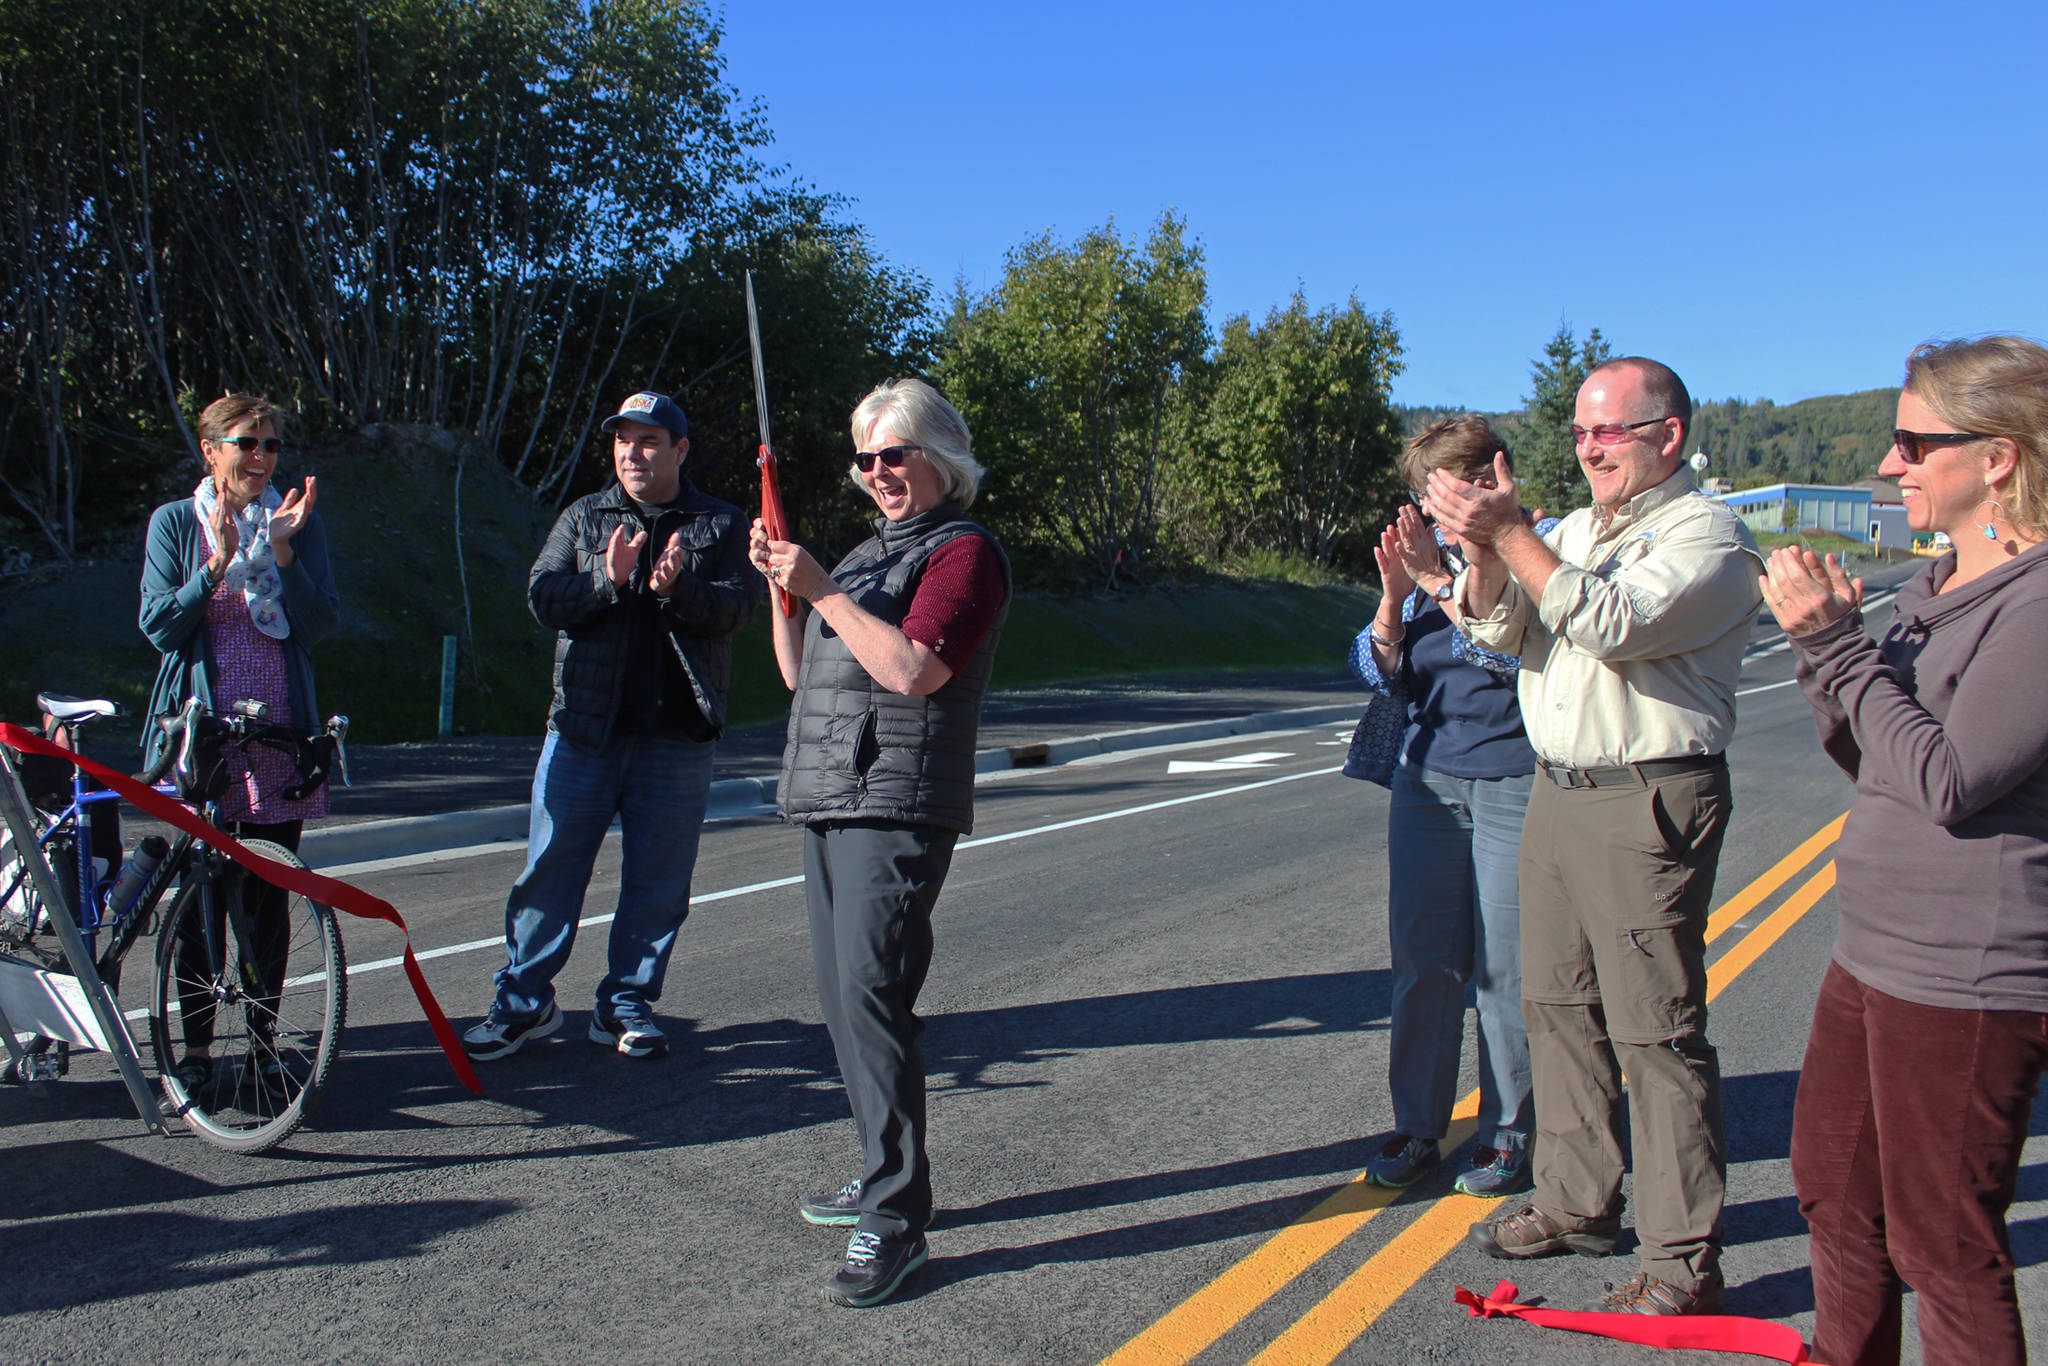 Members of the Homer City Council and Save-U-More Assistant Manager Brian Nahmis (second from left) celebrate after council member Shelly Erickson (third from left) cuts a ribbon in a grand opening ceremony for the completed Greatland Street on Tuesday, Sept. 25, 2018 in Homer, Alaska. (Photo by Megan Pacer/Homer News)